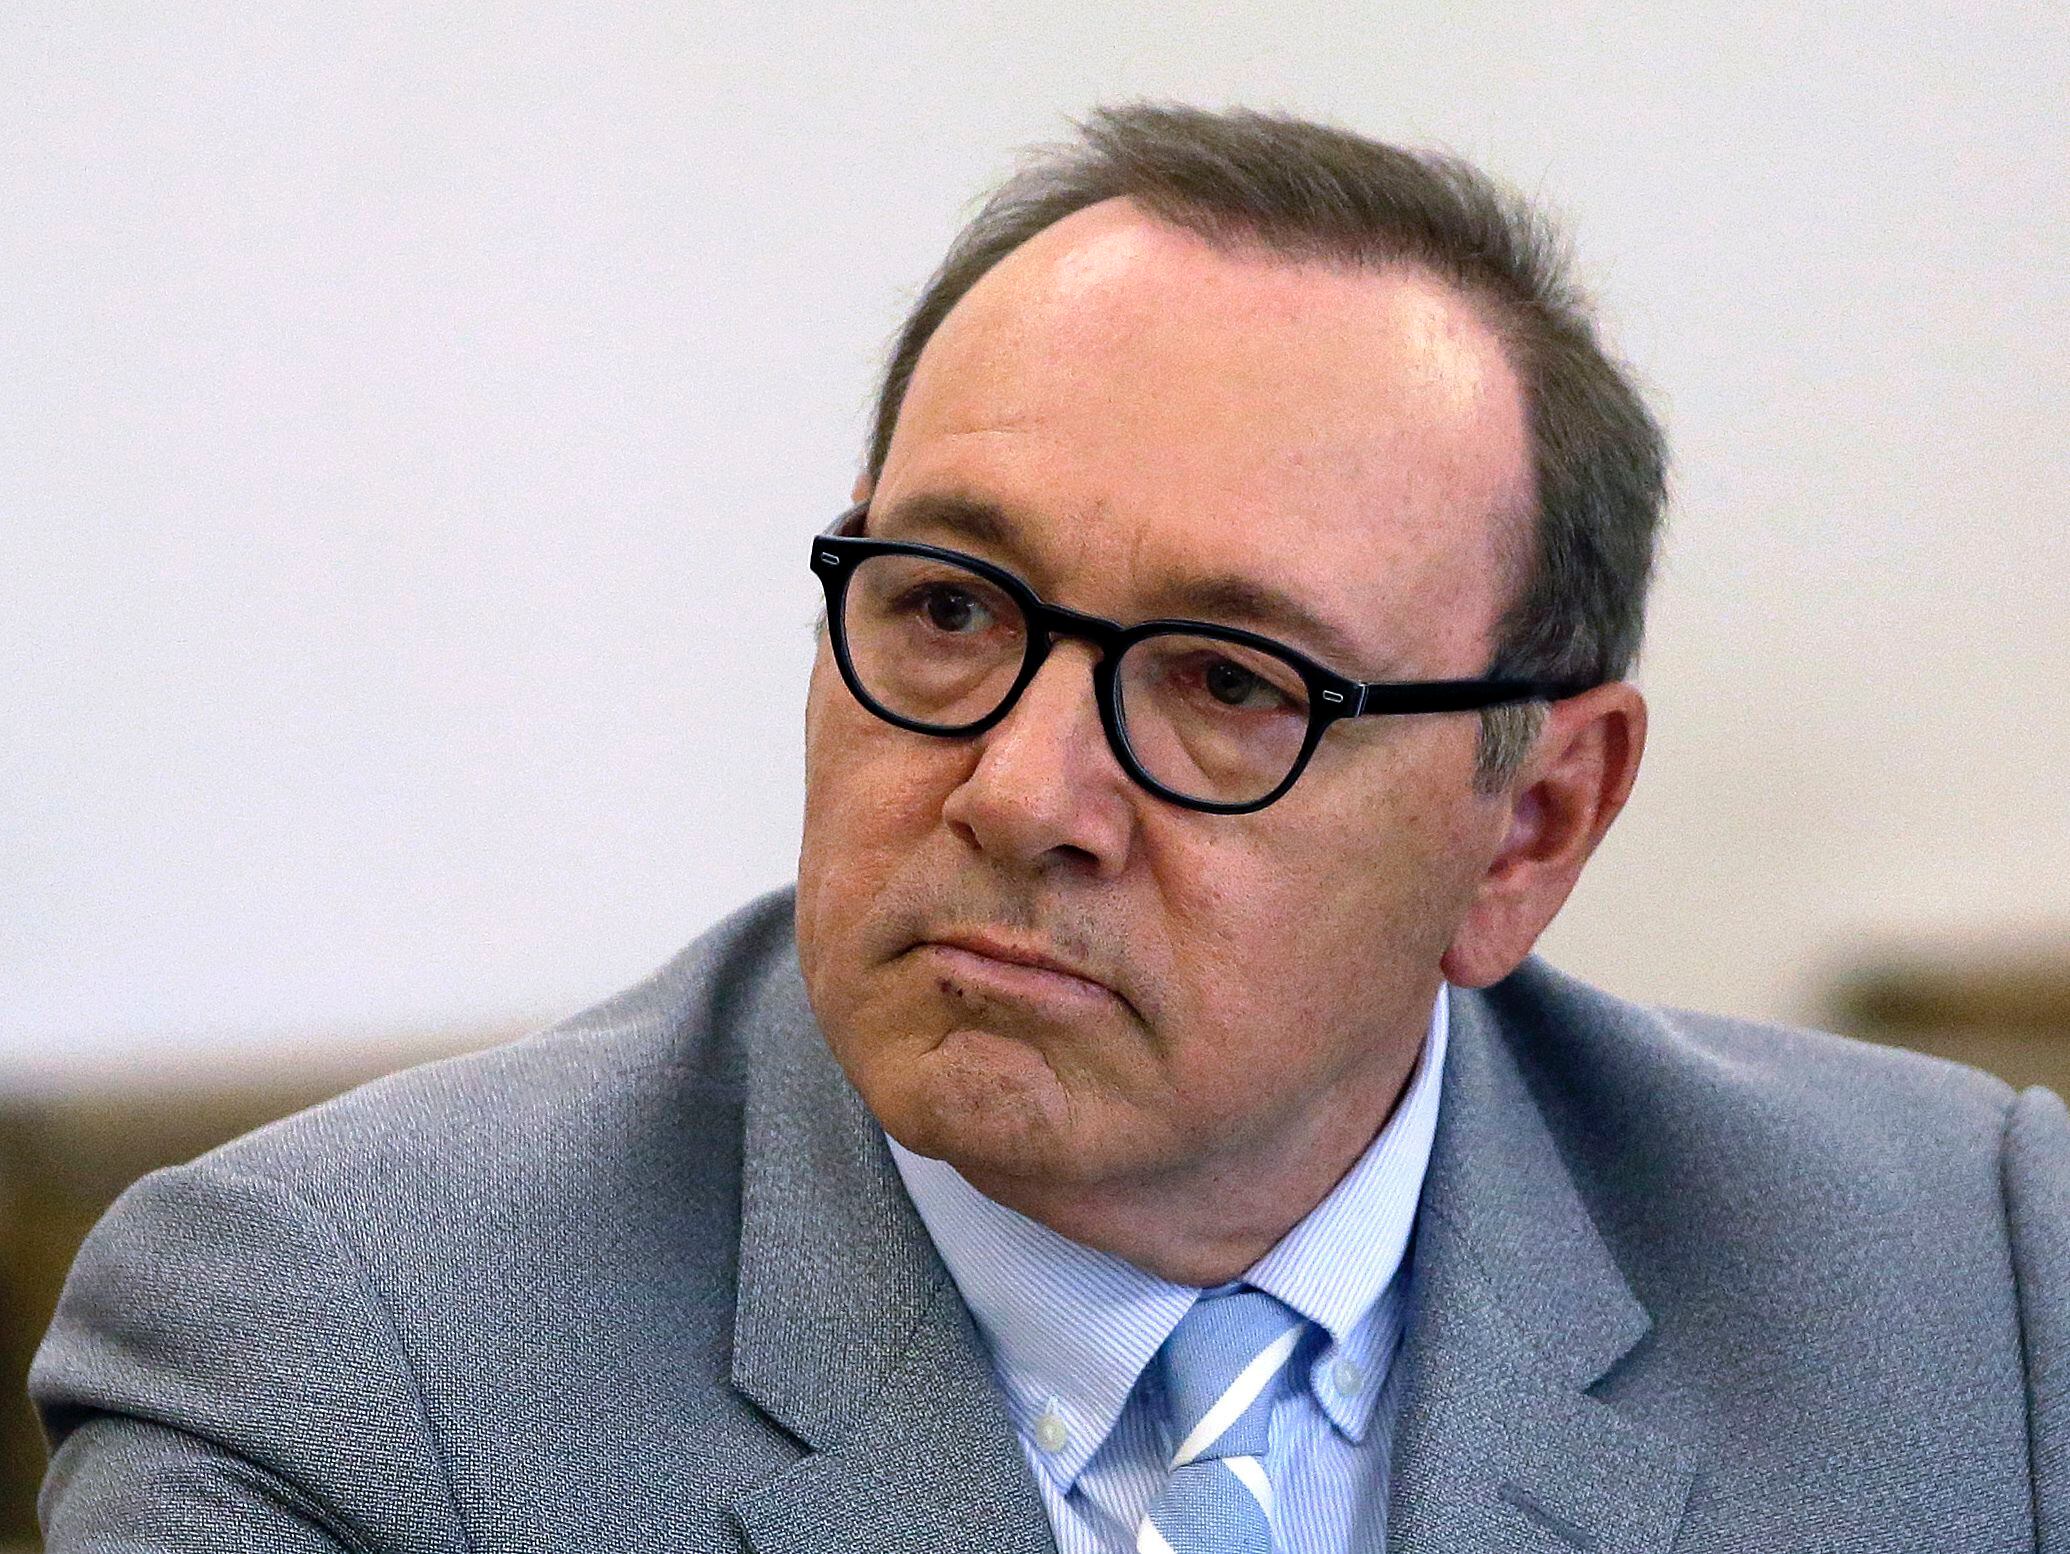 Kevin Spacey asks judge to axe Anthony Rapp’s sex abuse suit